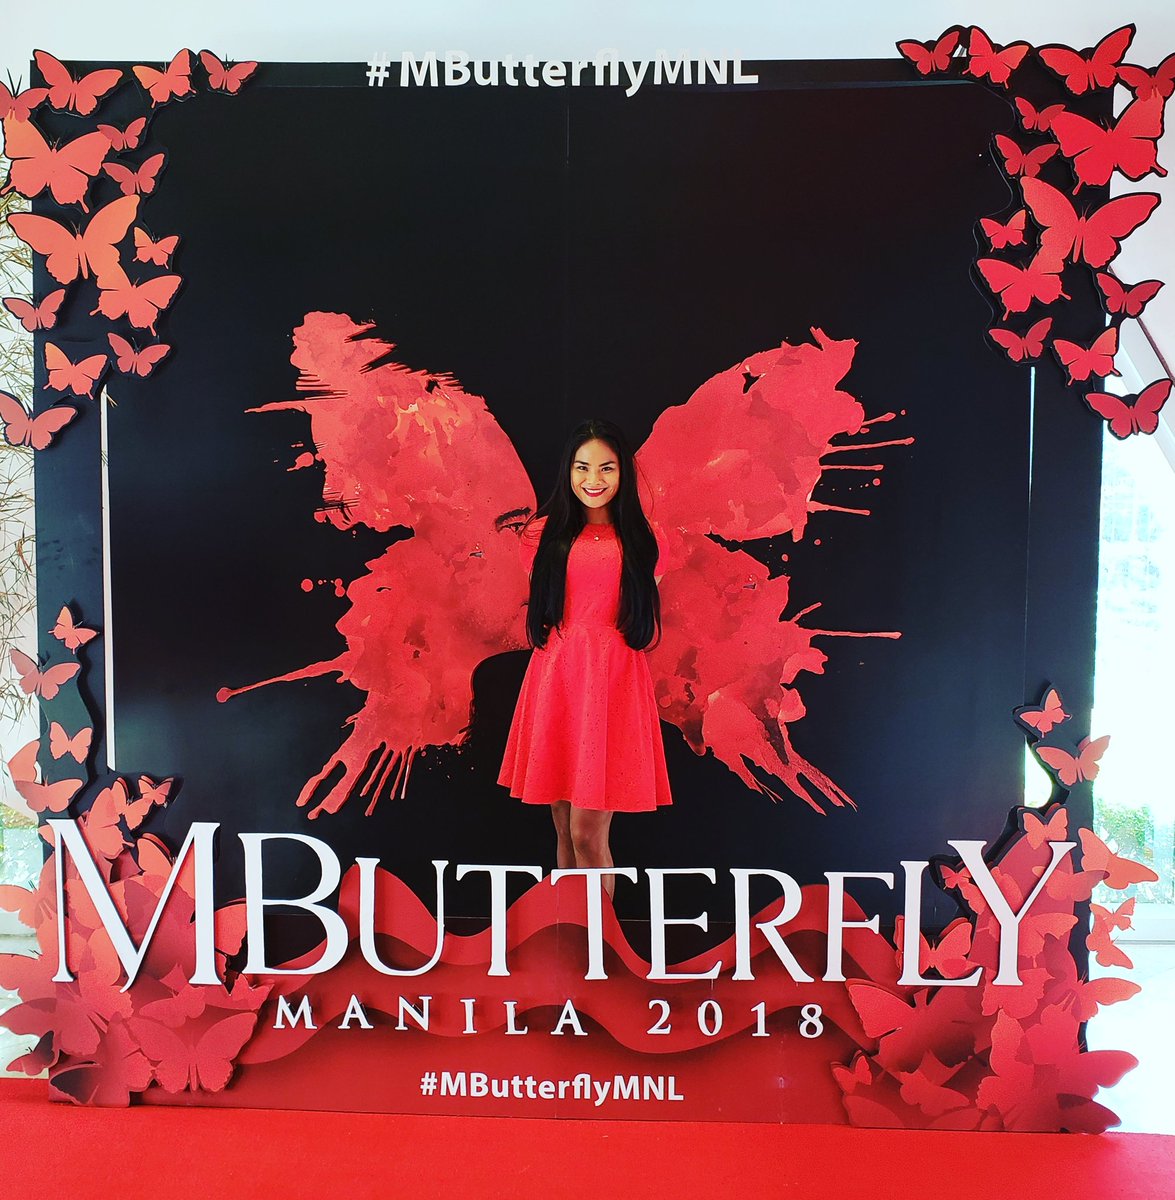 #SupportArts #theater #MButterflyMNL
#RSFrancisco #OlivierBorten #LeeOBrian
David Henry Hwang's award-winning play 'M. Butterfly,' showing tonight Friday September 28 at 8 pm
ticketworld.com
#actorslife🎬 #actingskills #theartexplorer #actresses #MButterflyMNL